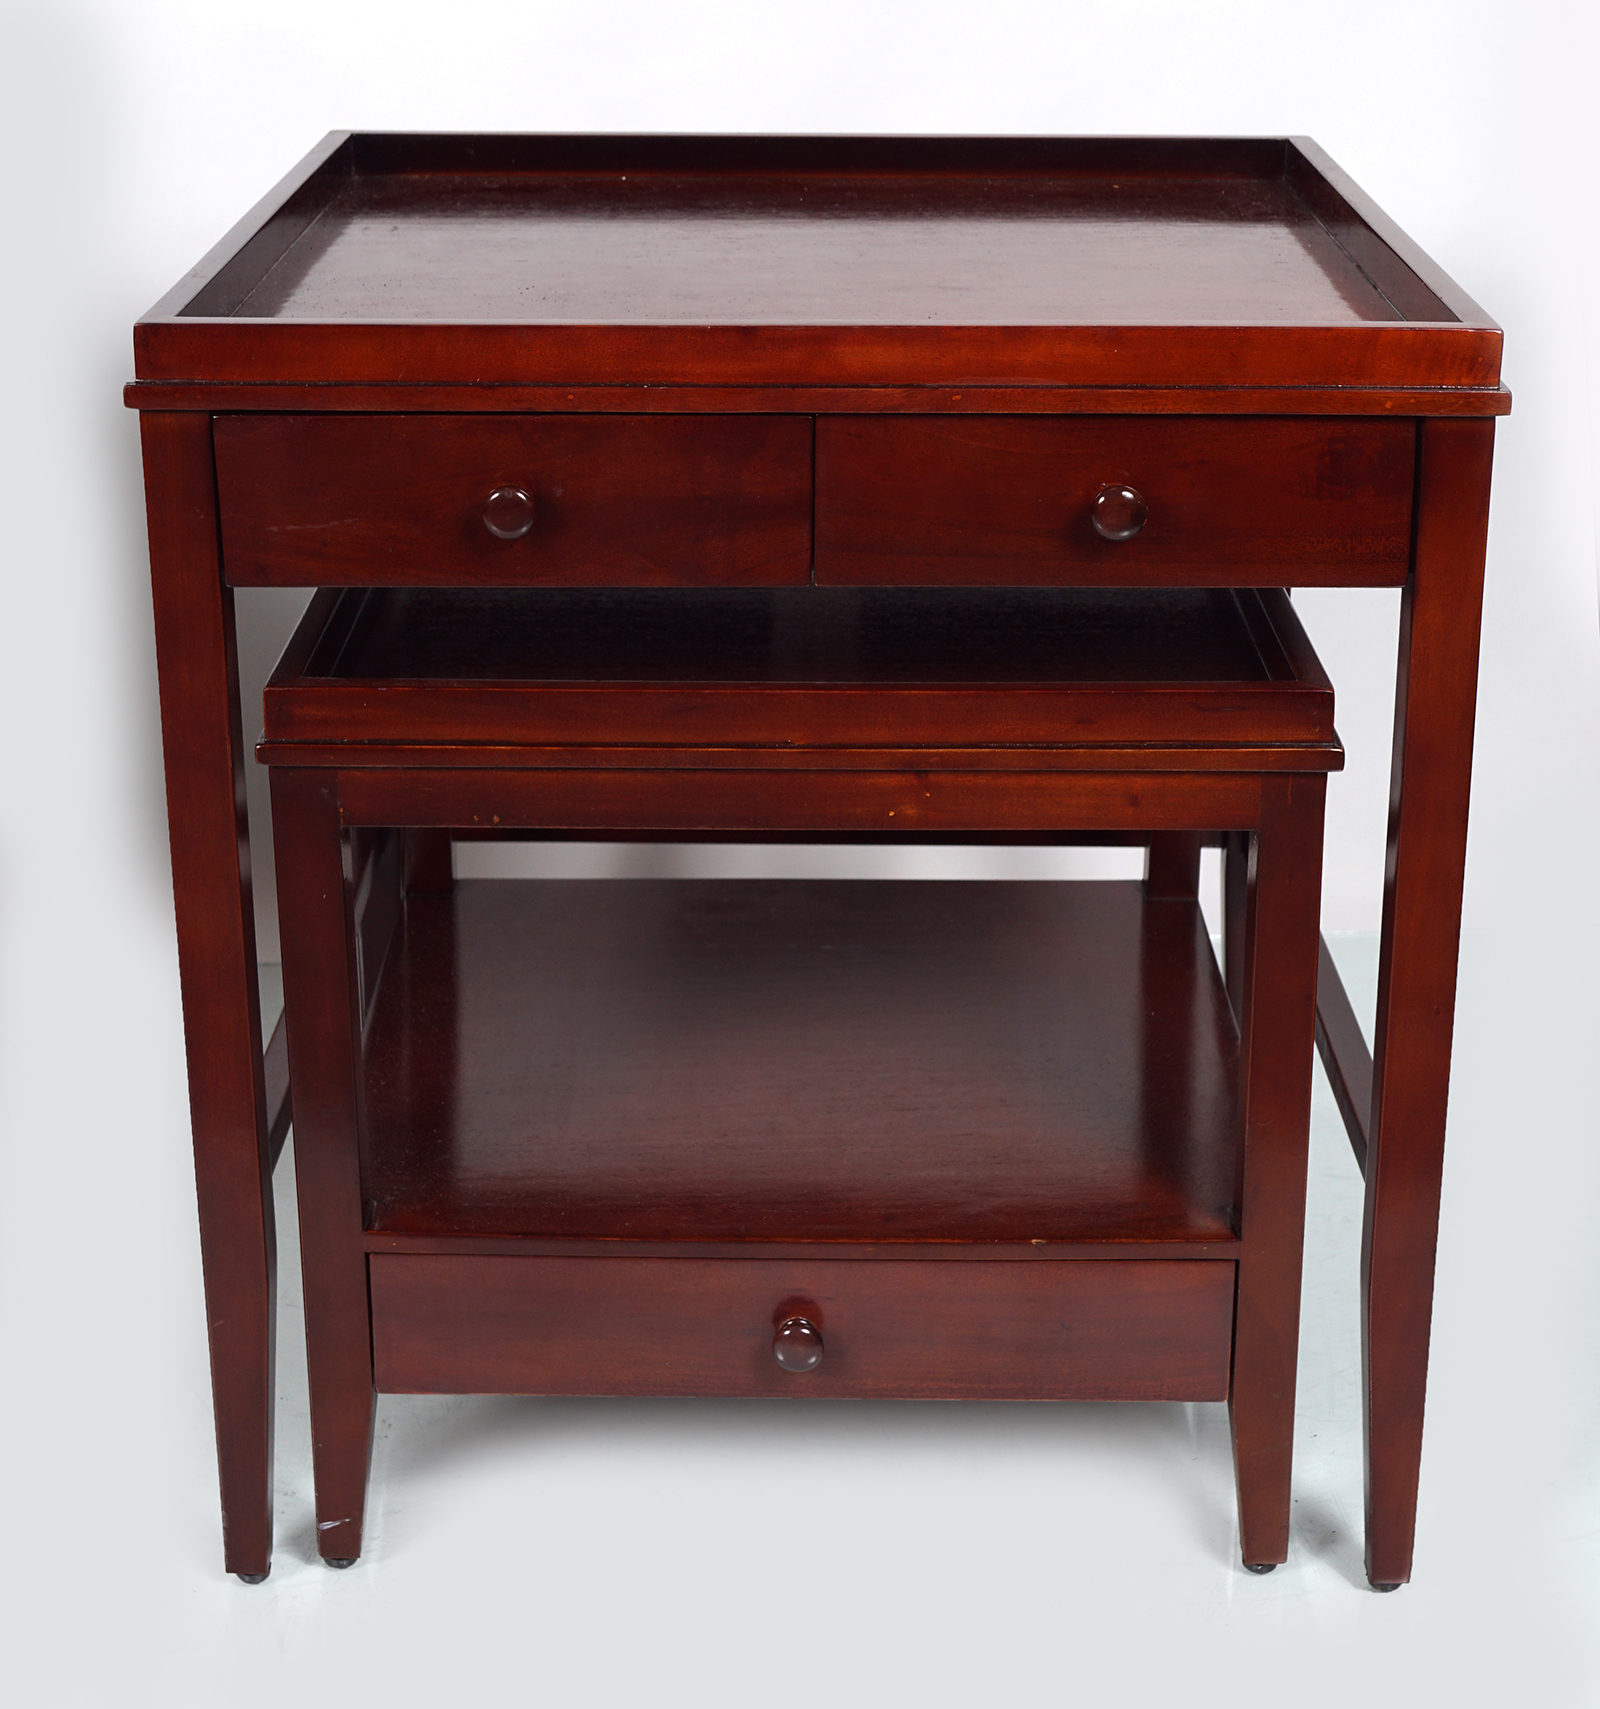 PAIR OF GEORGE III STYLE MAHOGANY BEDSIDE TABLES